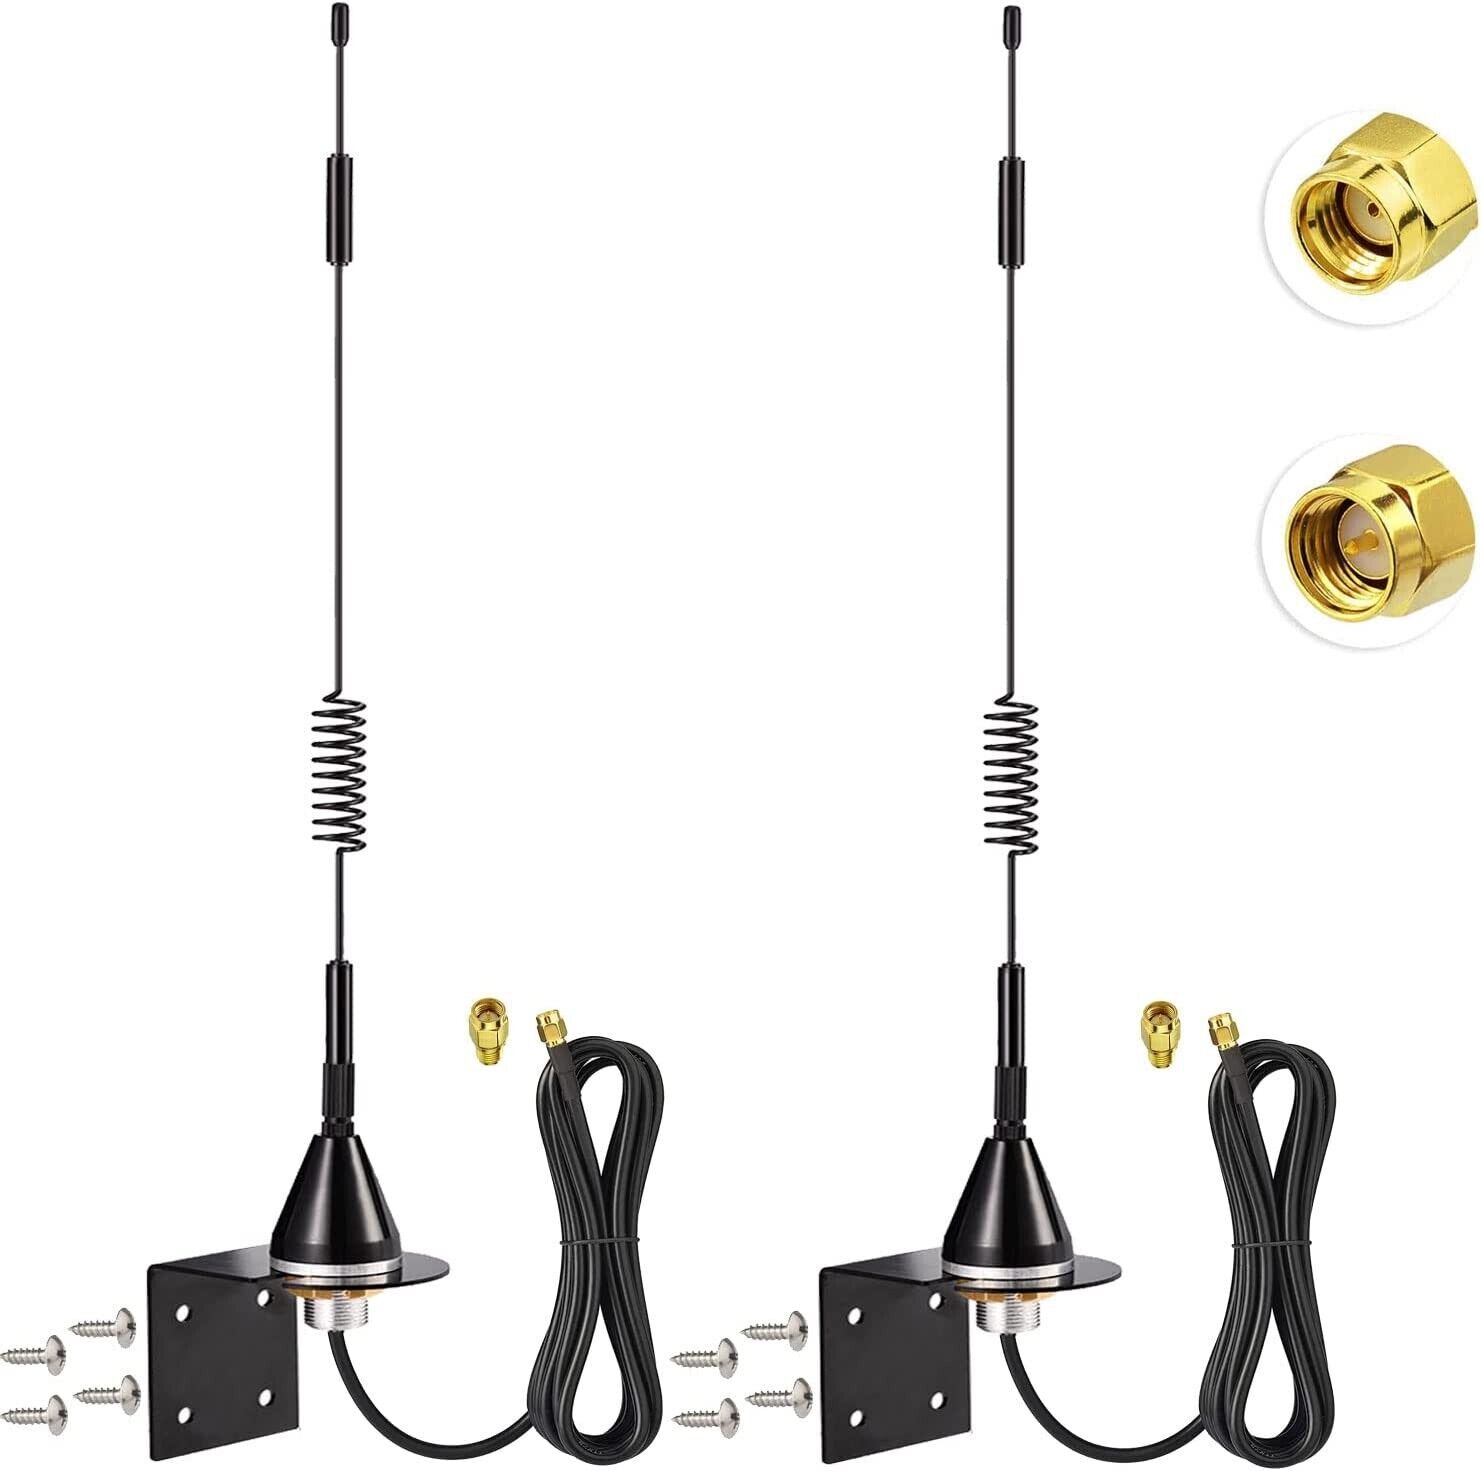 2pc Bingfu 4G RP-SMA Antenna 7dBi Outdoor for Spypoint Link Micro Covert Spartan